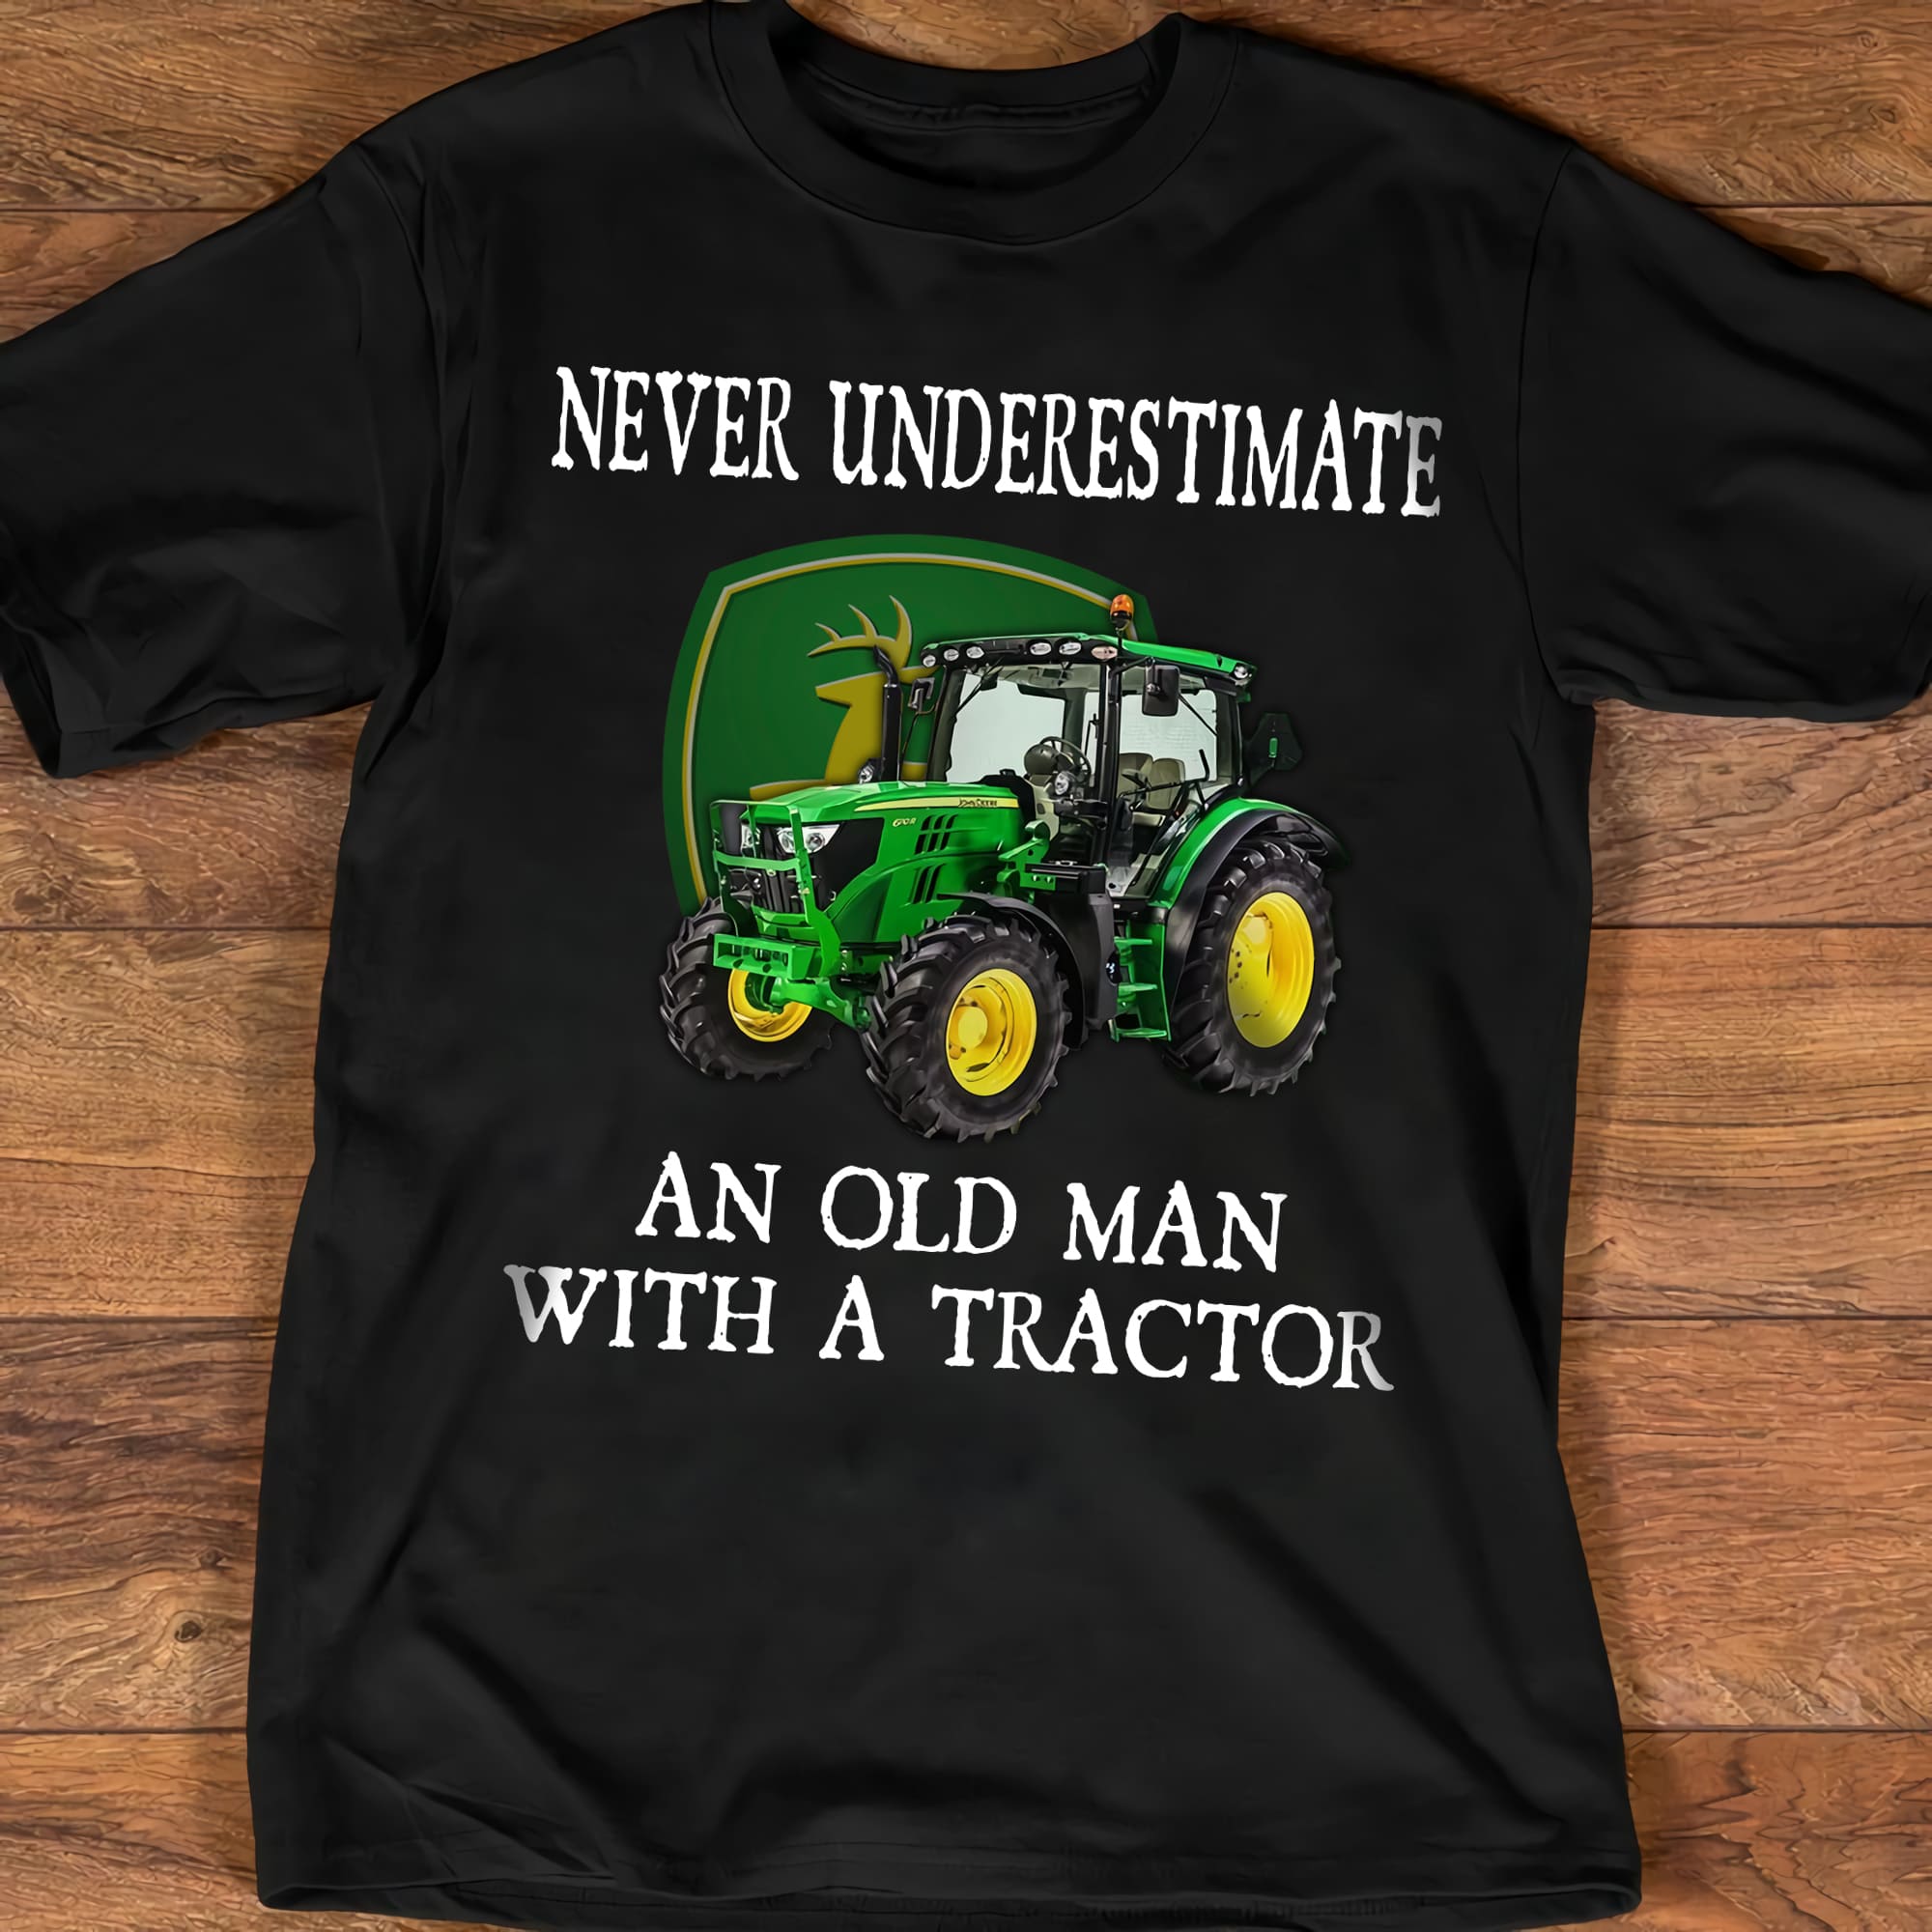 Never underestimate an old man with a tractor - Tractor driver, farmder drive tractor